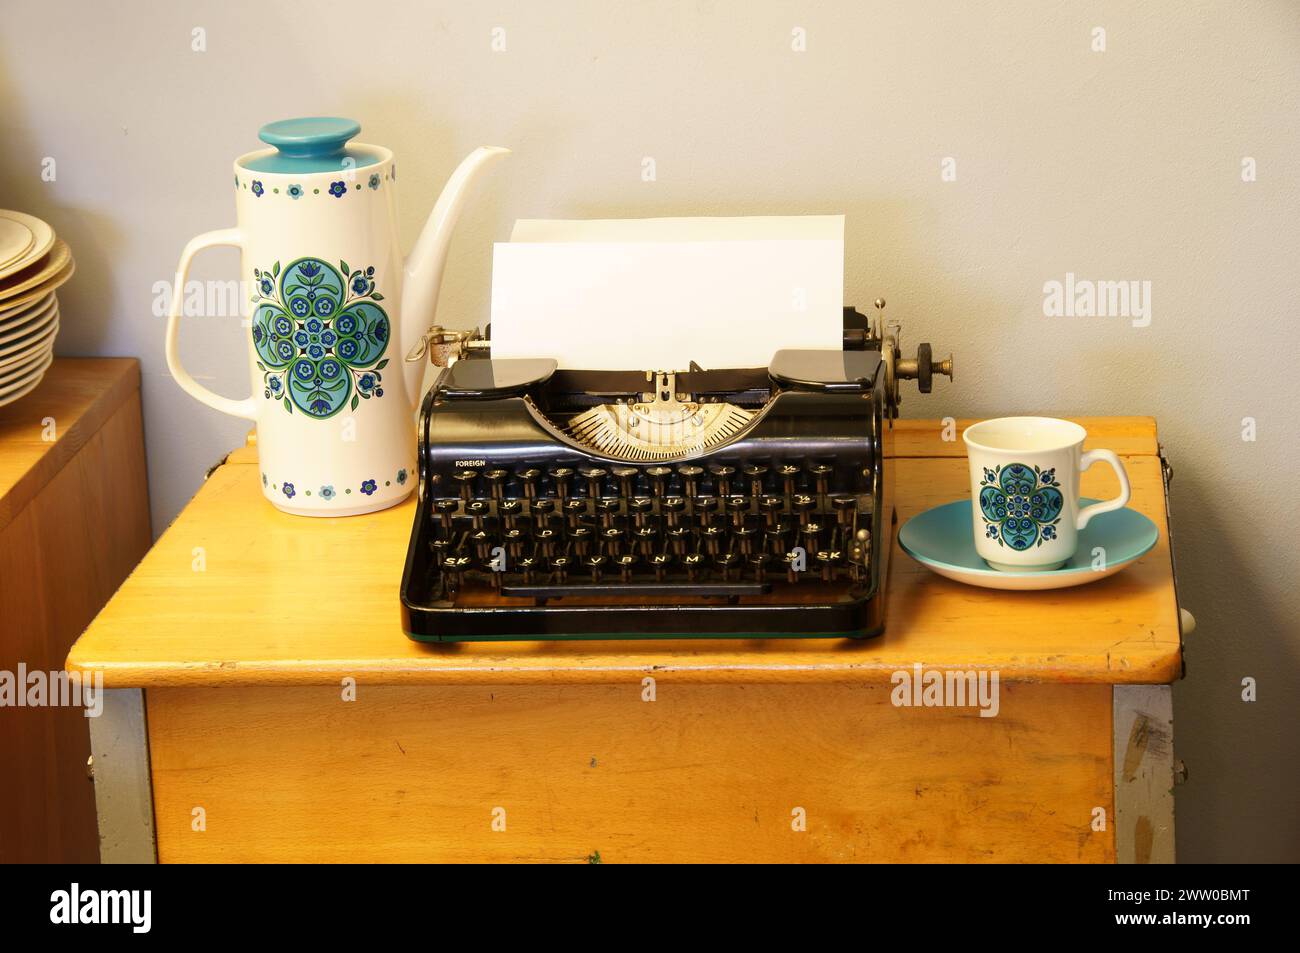 Graphic art and photography for writers of a retro typewriter, vintage coffee pots, tea pots and tea cups. Stock Photo